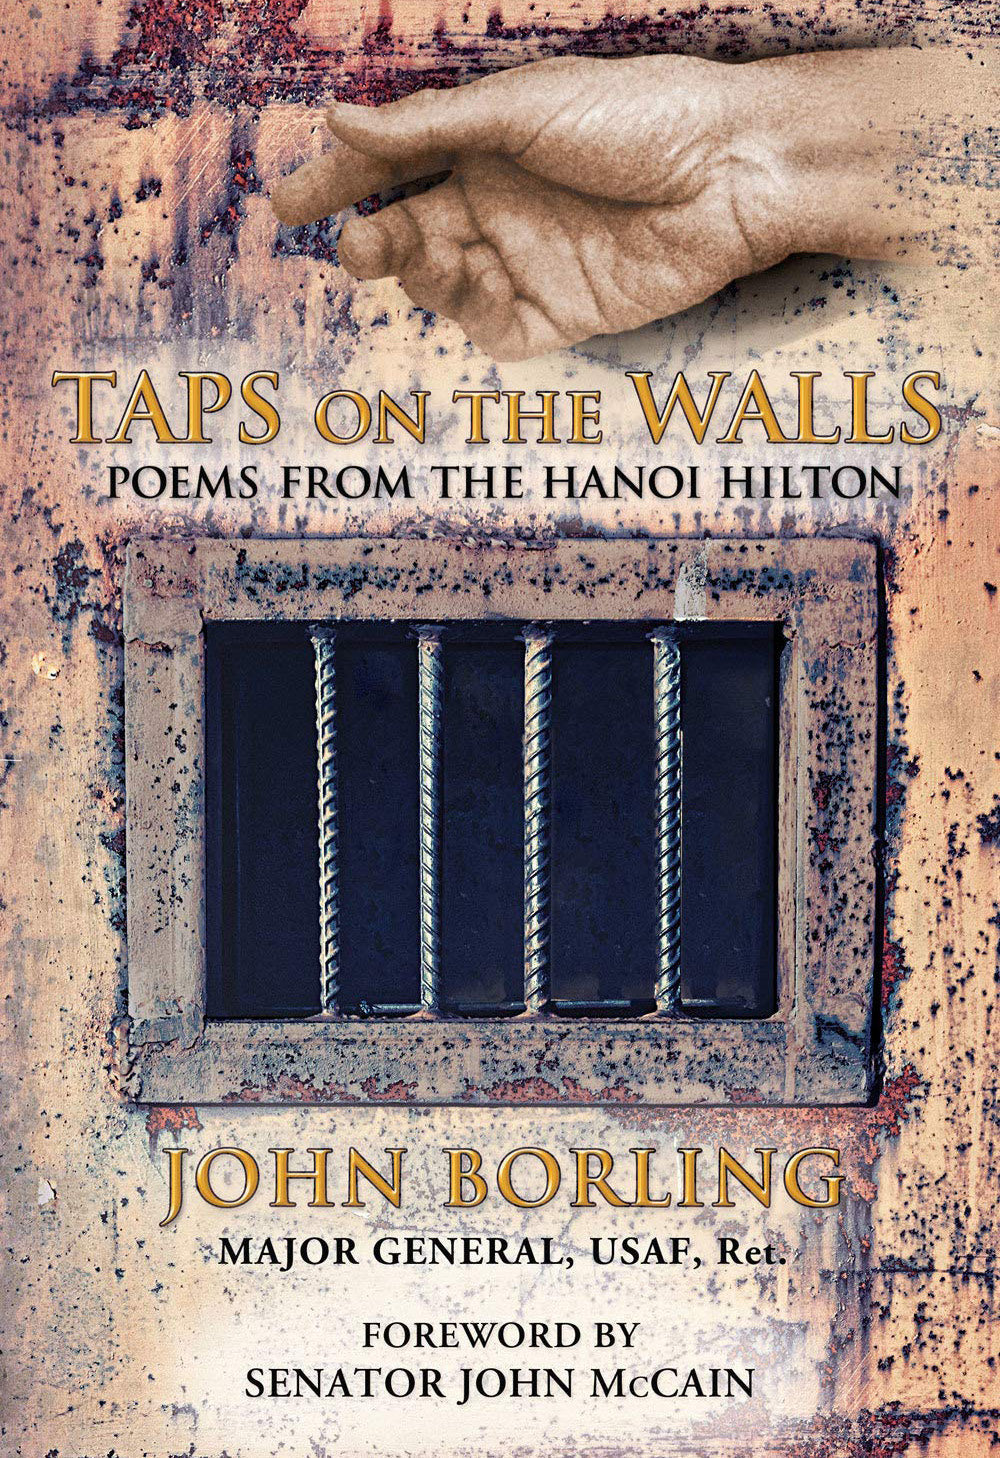 Taps on the Walls: Poems from the Hanoi Hilton by John Borling